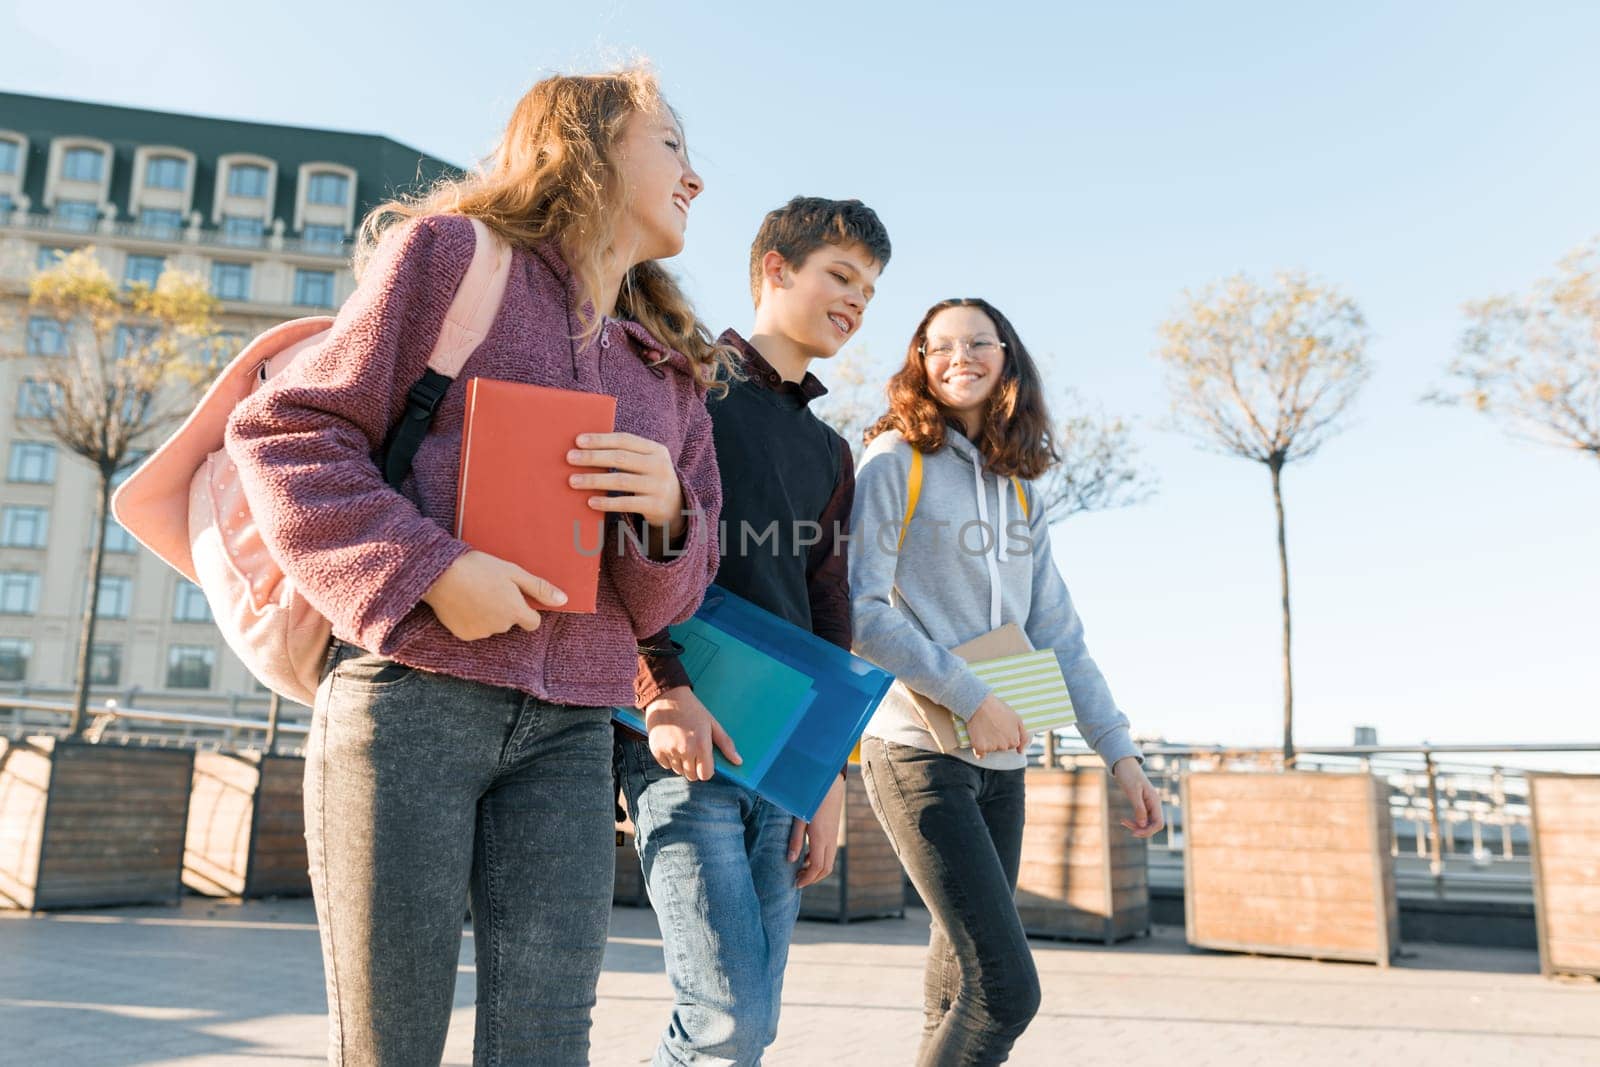 Outdoor portrait of teenage students with backpacks walking and talking. City background, golden hour.